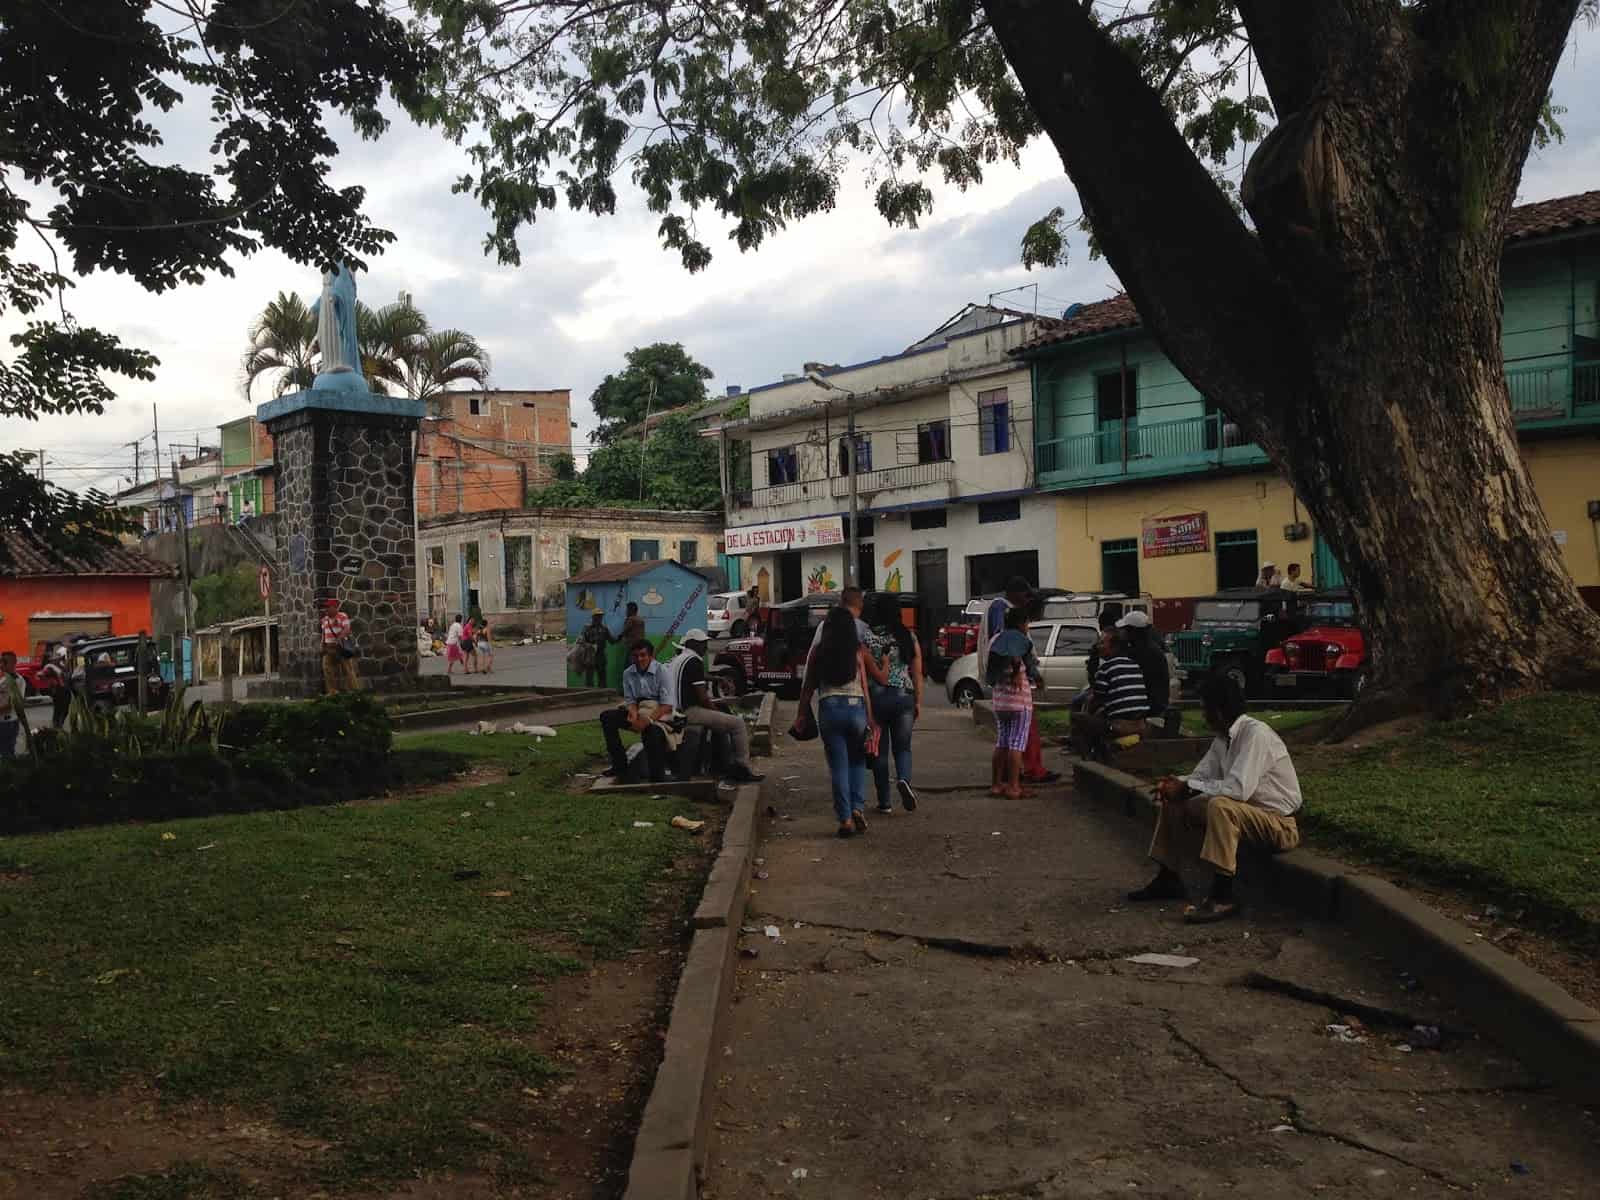 Plaza with jeeps and buses in Quimbaya, Quindío, Colombia